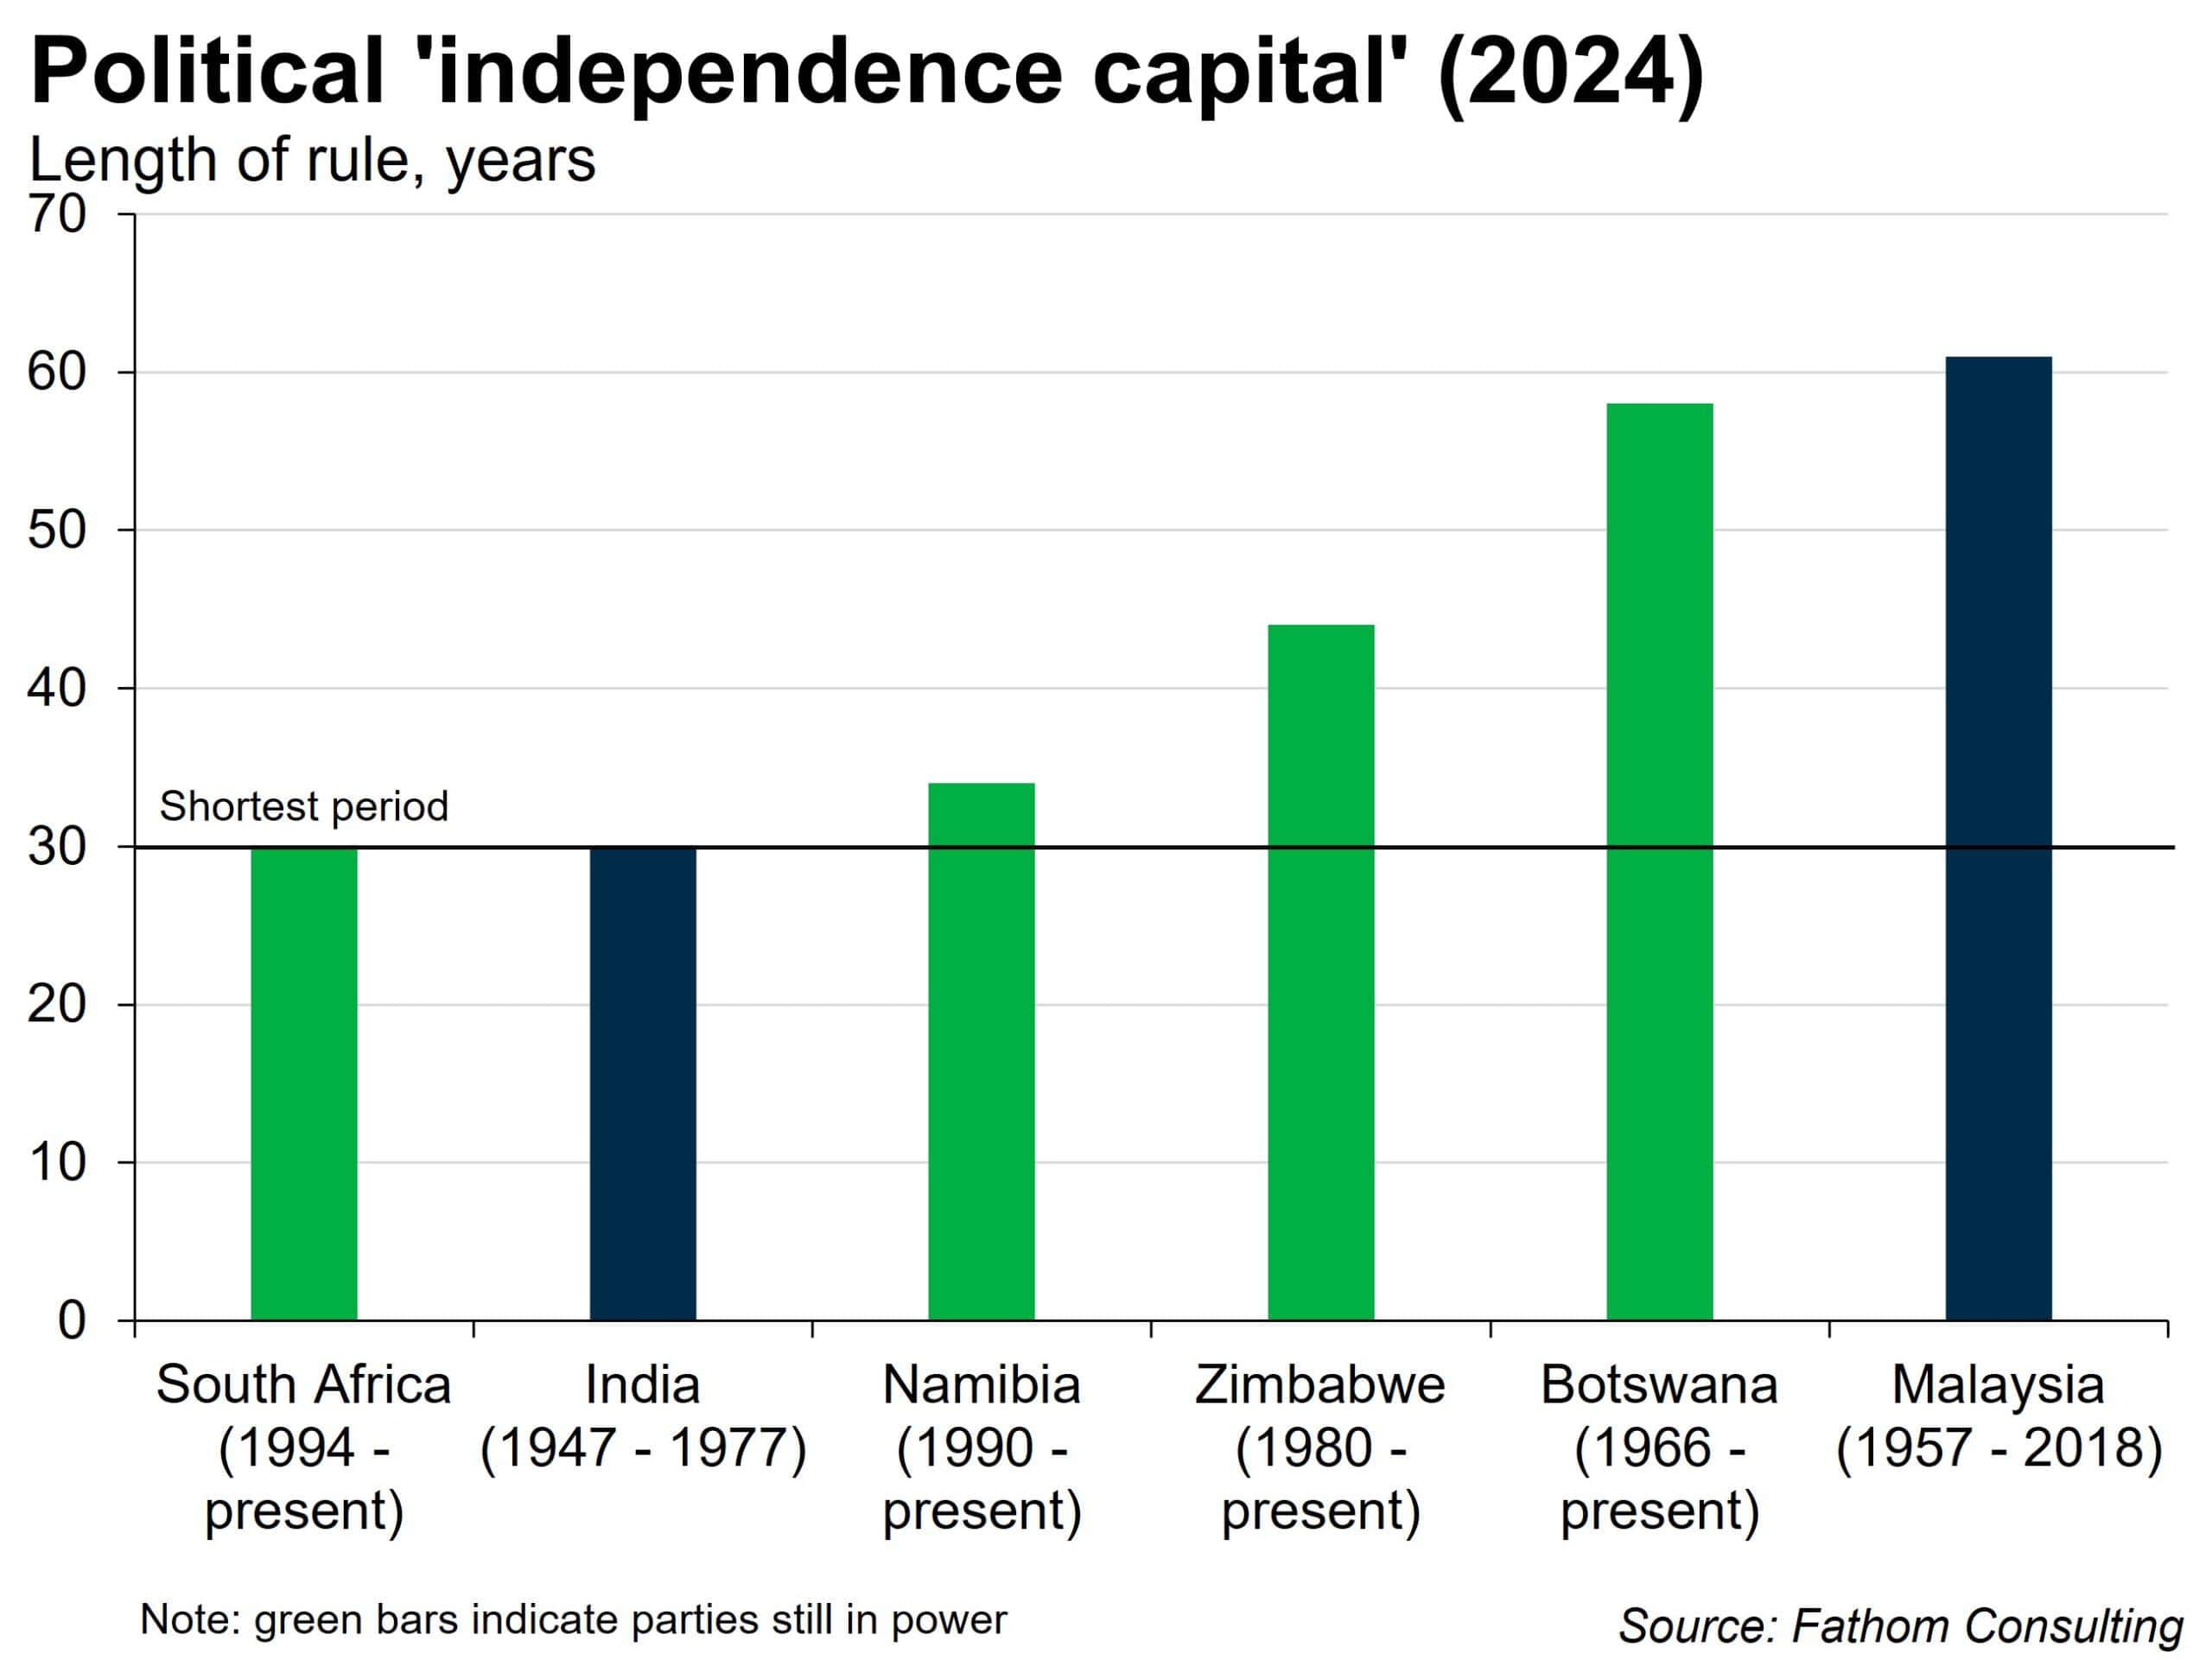 Political 'independence capital' in 2024, length or rule for South Africa, Nambia, India, Zimbabwe, Botswana, Malaysia.